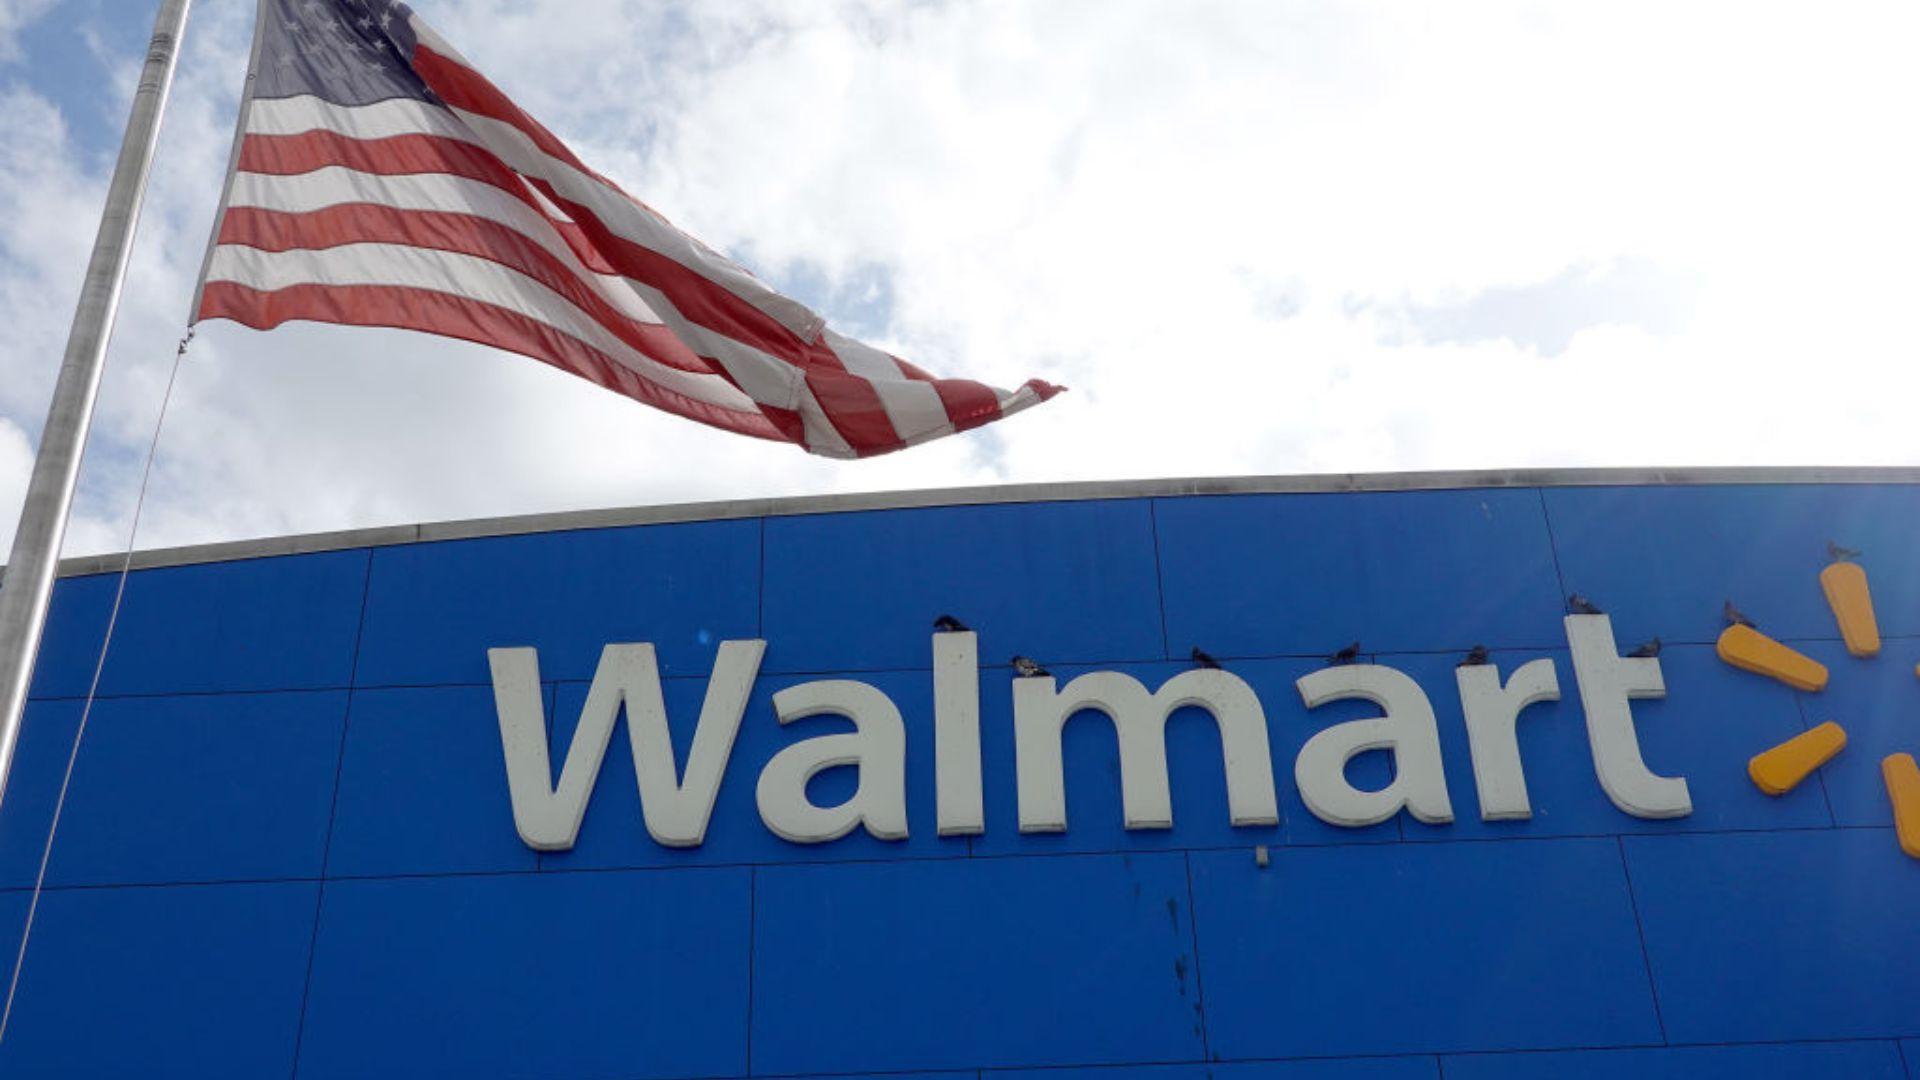 A Walmart storefront with the store's name in large white and yellow letters against a blue background. Above the store, an American flag is waving on a flagpole